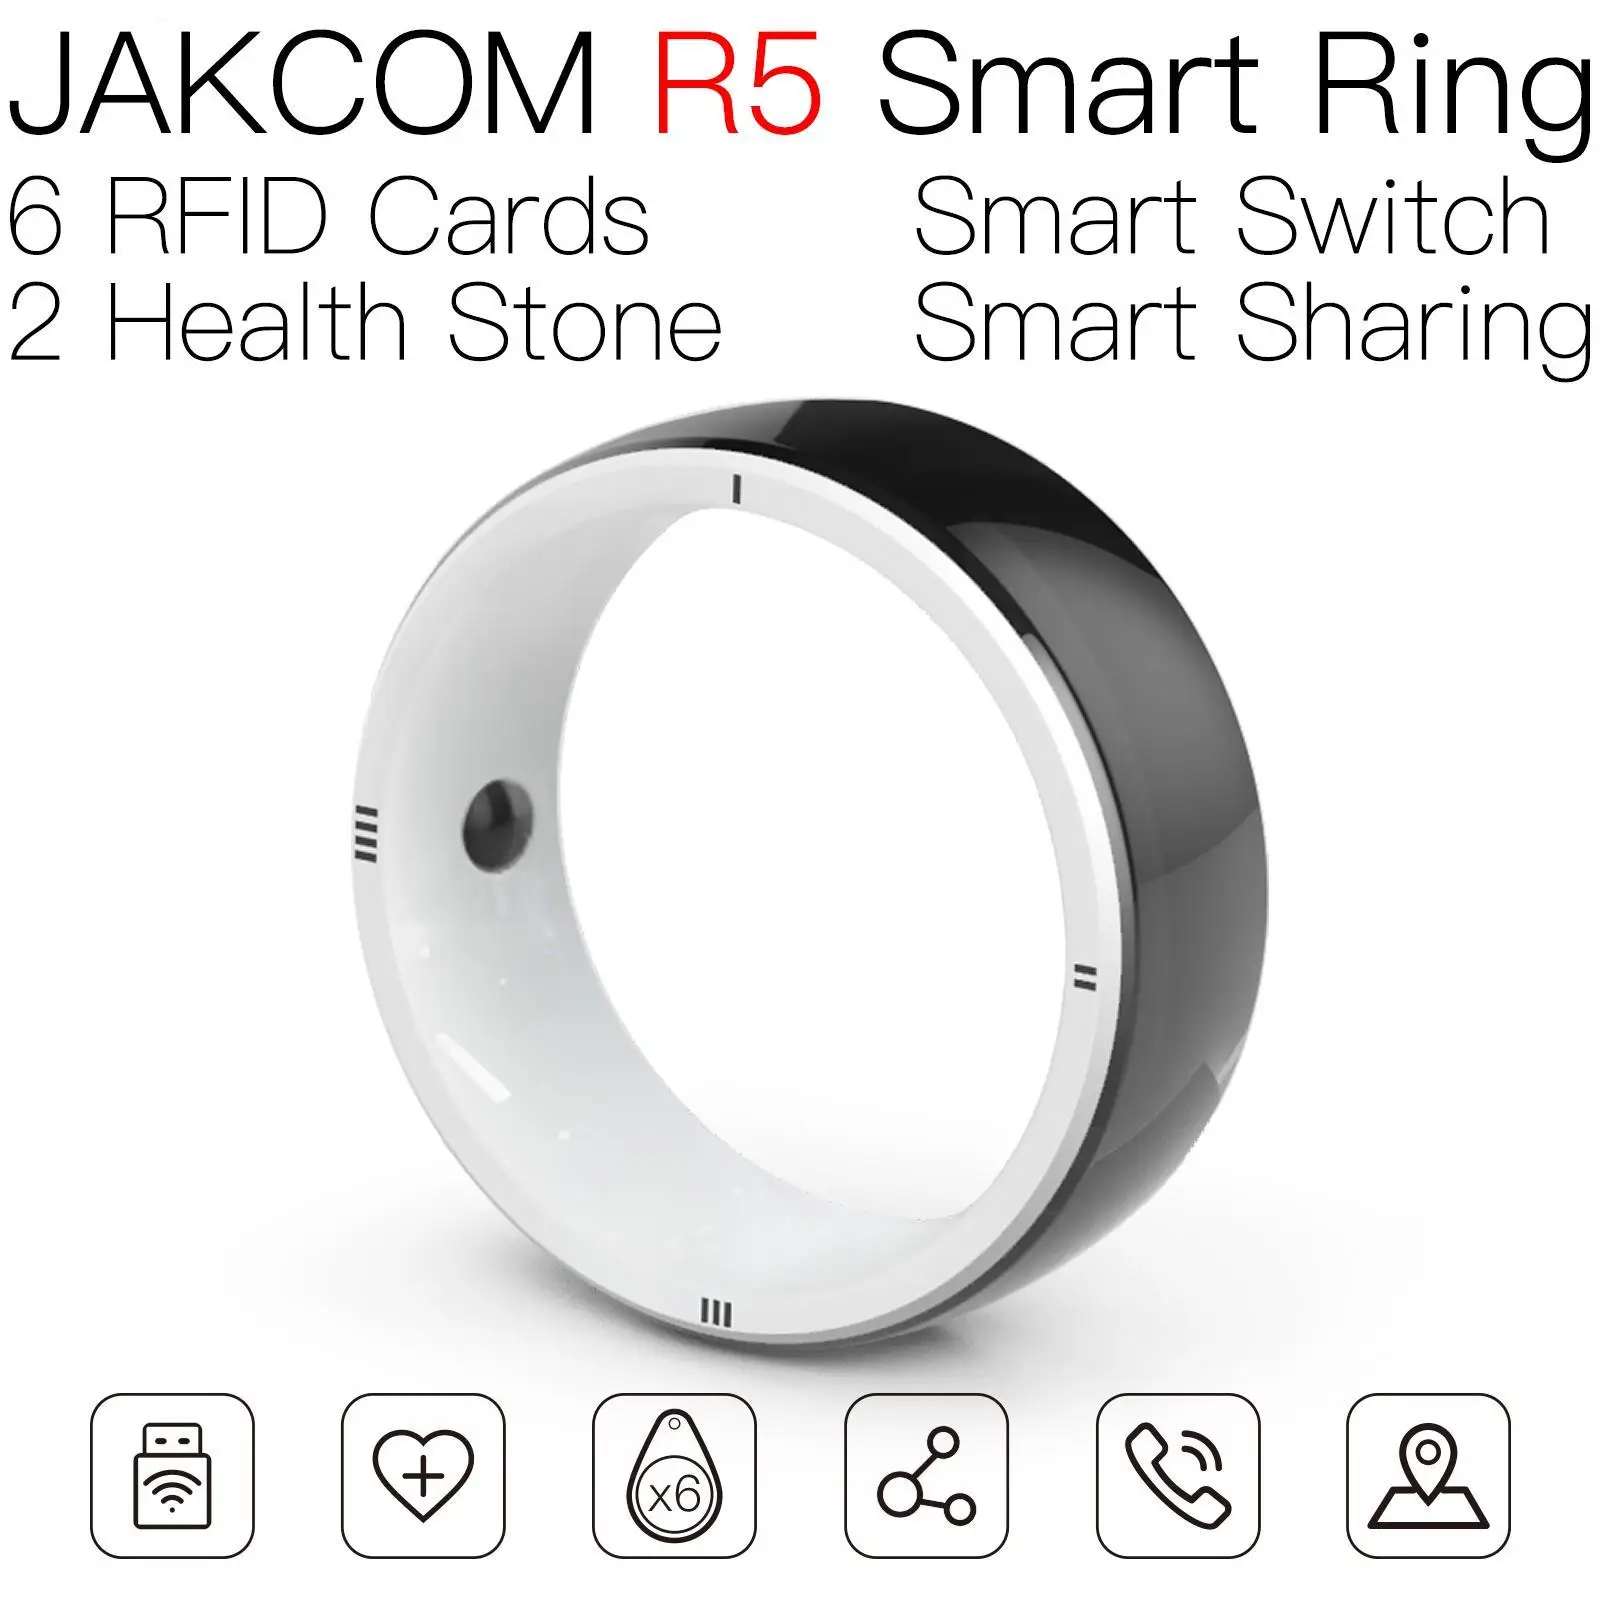 

JAKCOM R5 Smart Ring Nice than black rfid stickers nfc payment link smartphone global cow tag code 32b 13 56 30mm stand